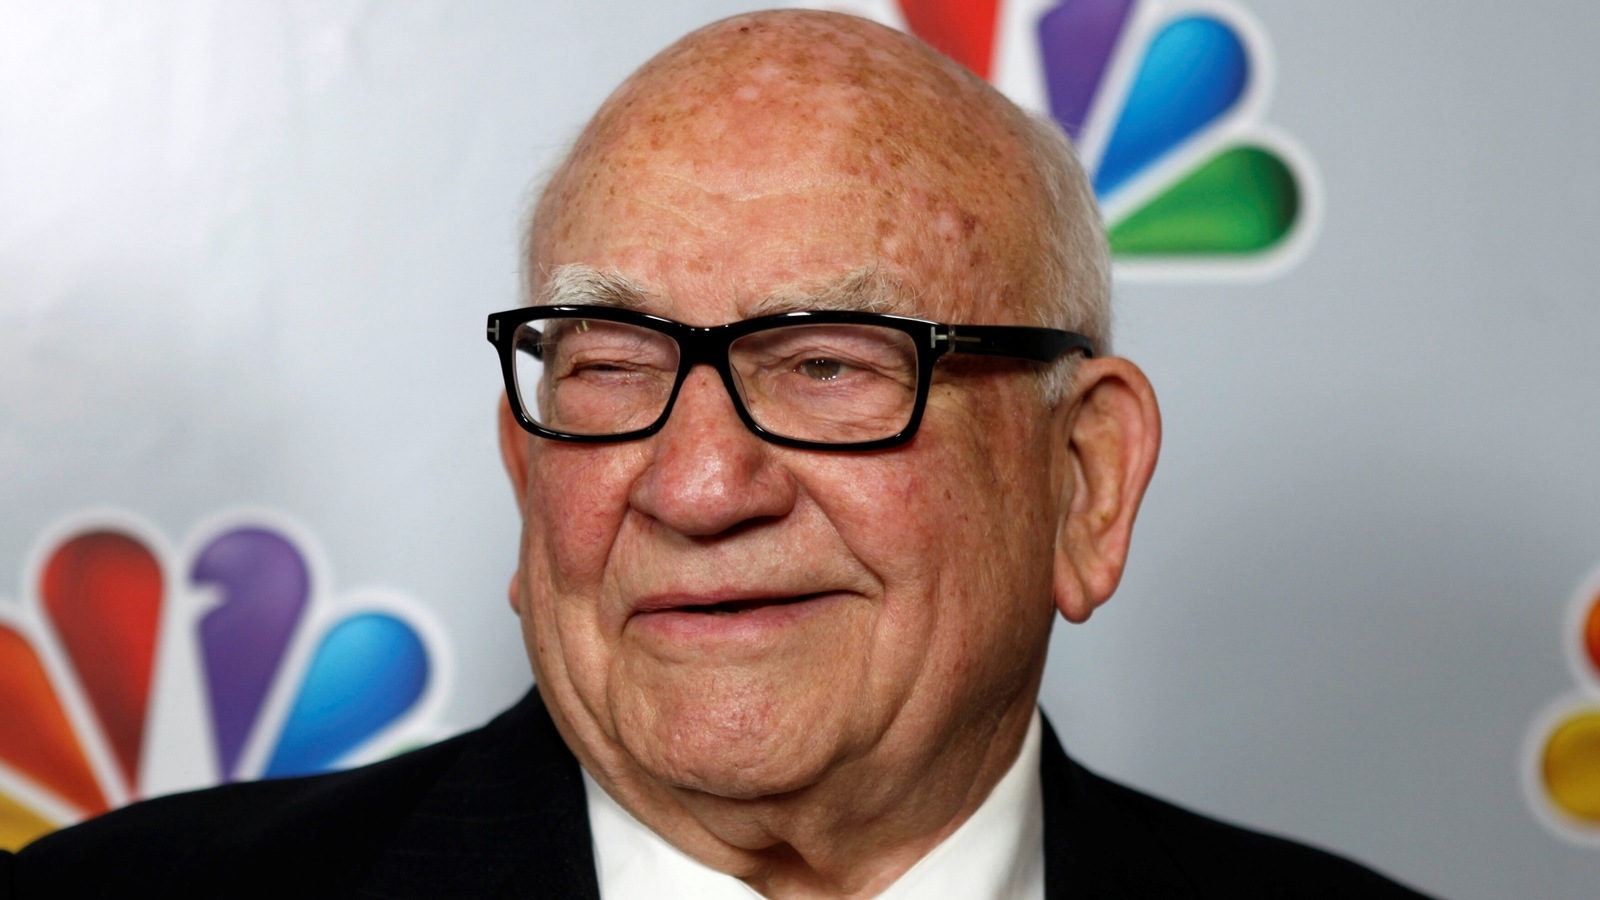 Emmy winning Up actor Ed Asner dies at 91 tributes pour in: #39 A great